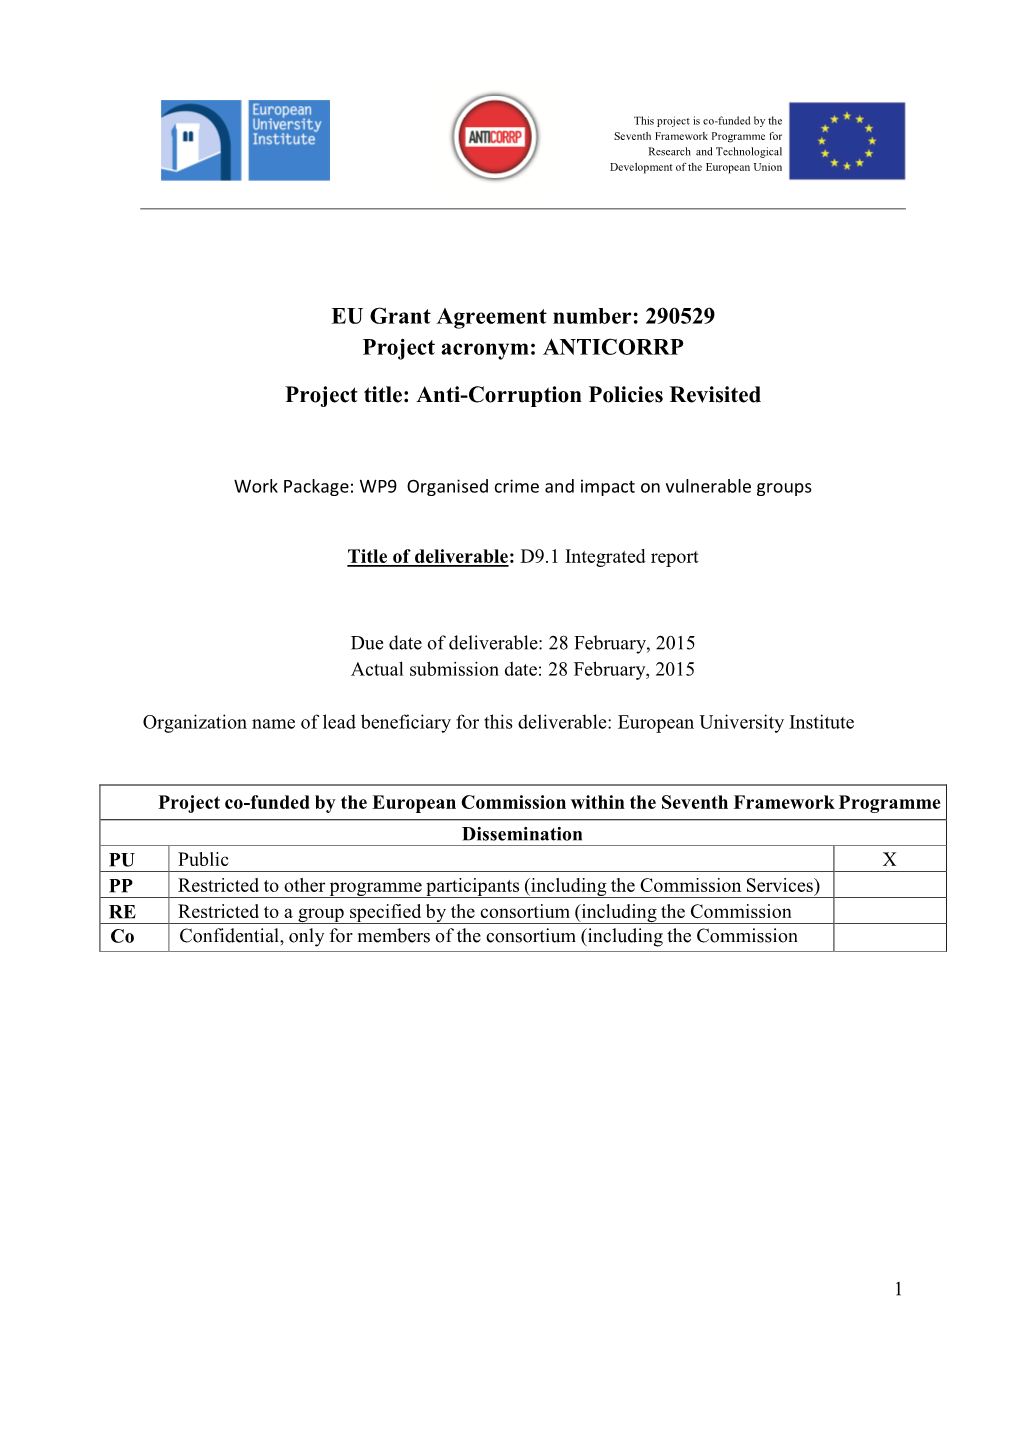 ANTICORRP Project Title: Anti-Corruption Policies Revisited